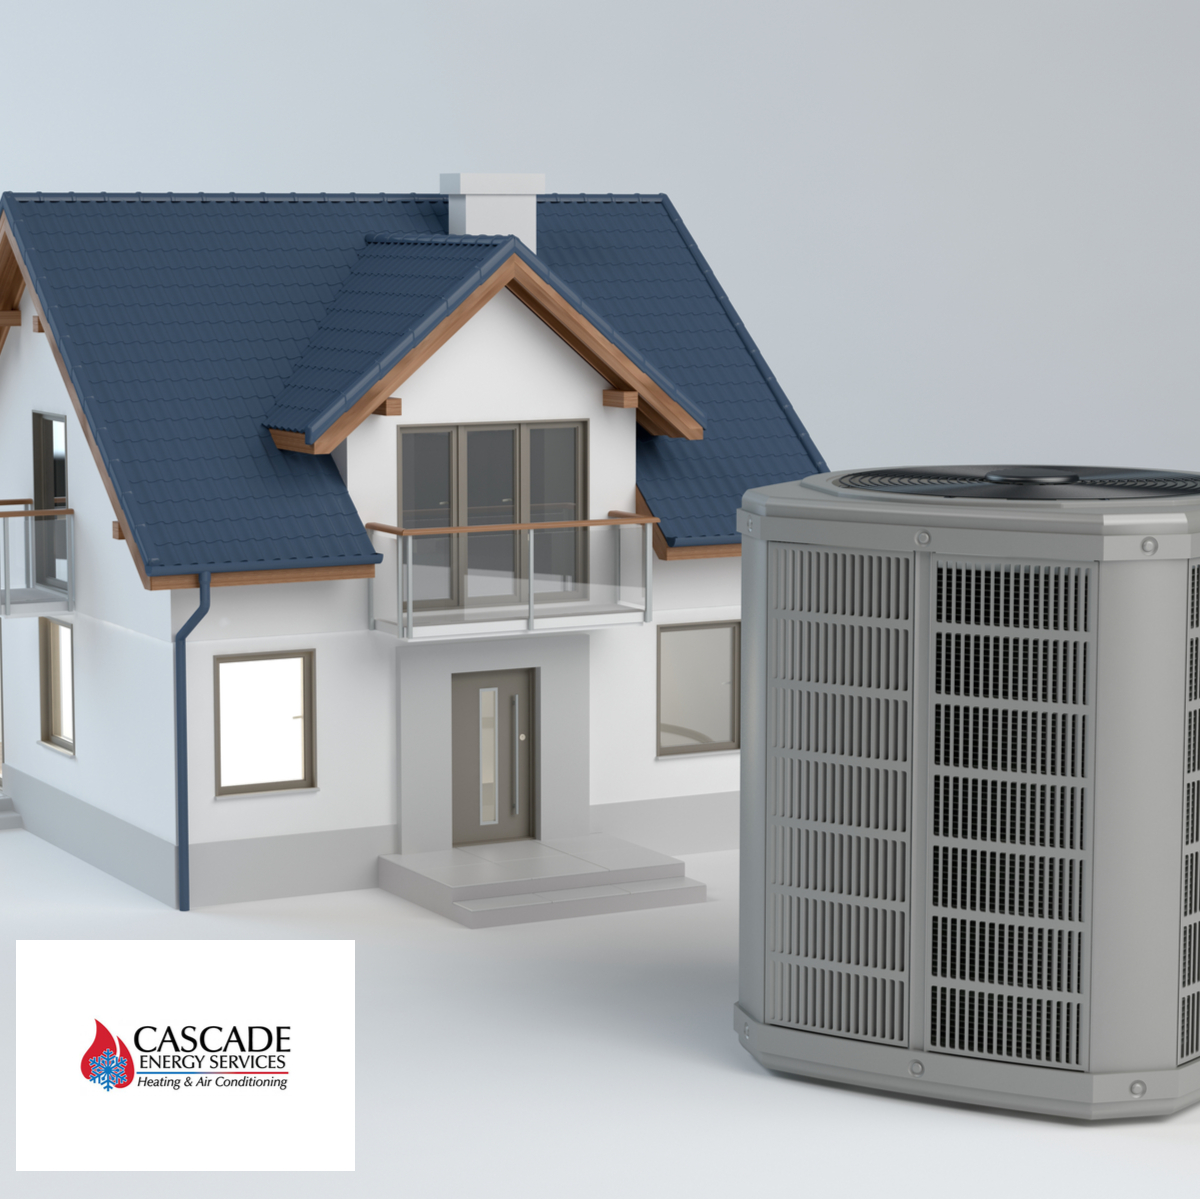 Contact Cascade Energy Services for Preventative Maintenance of Your Home’s Heat Pump!